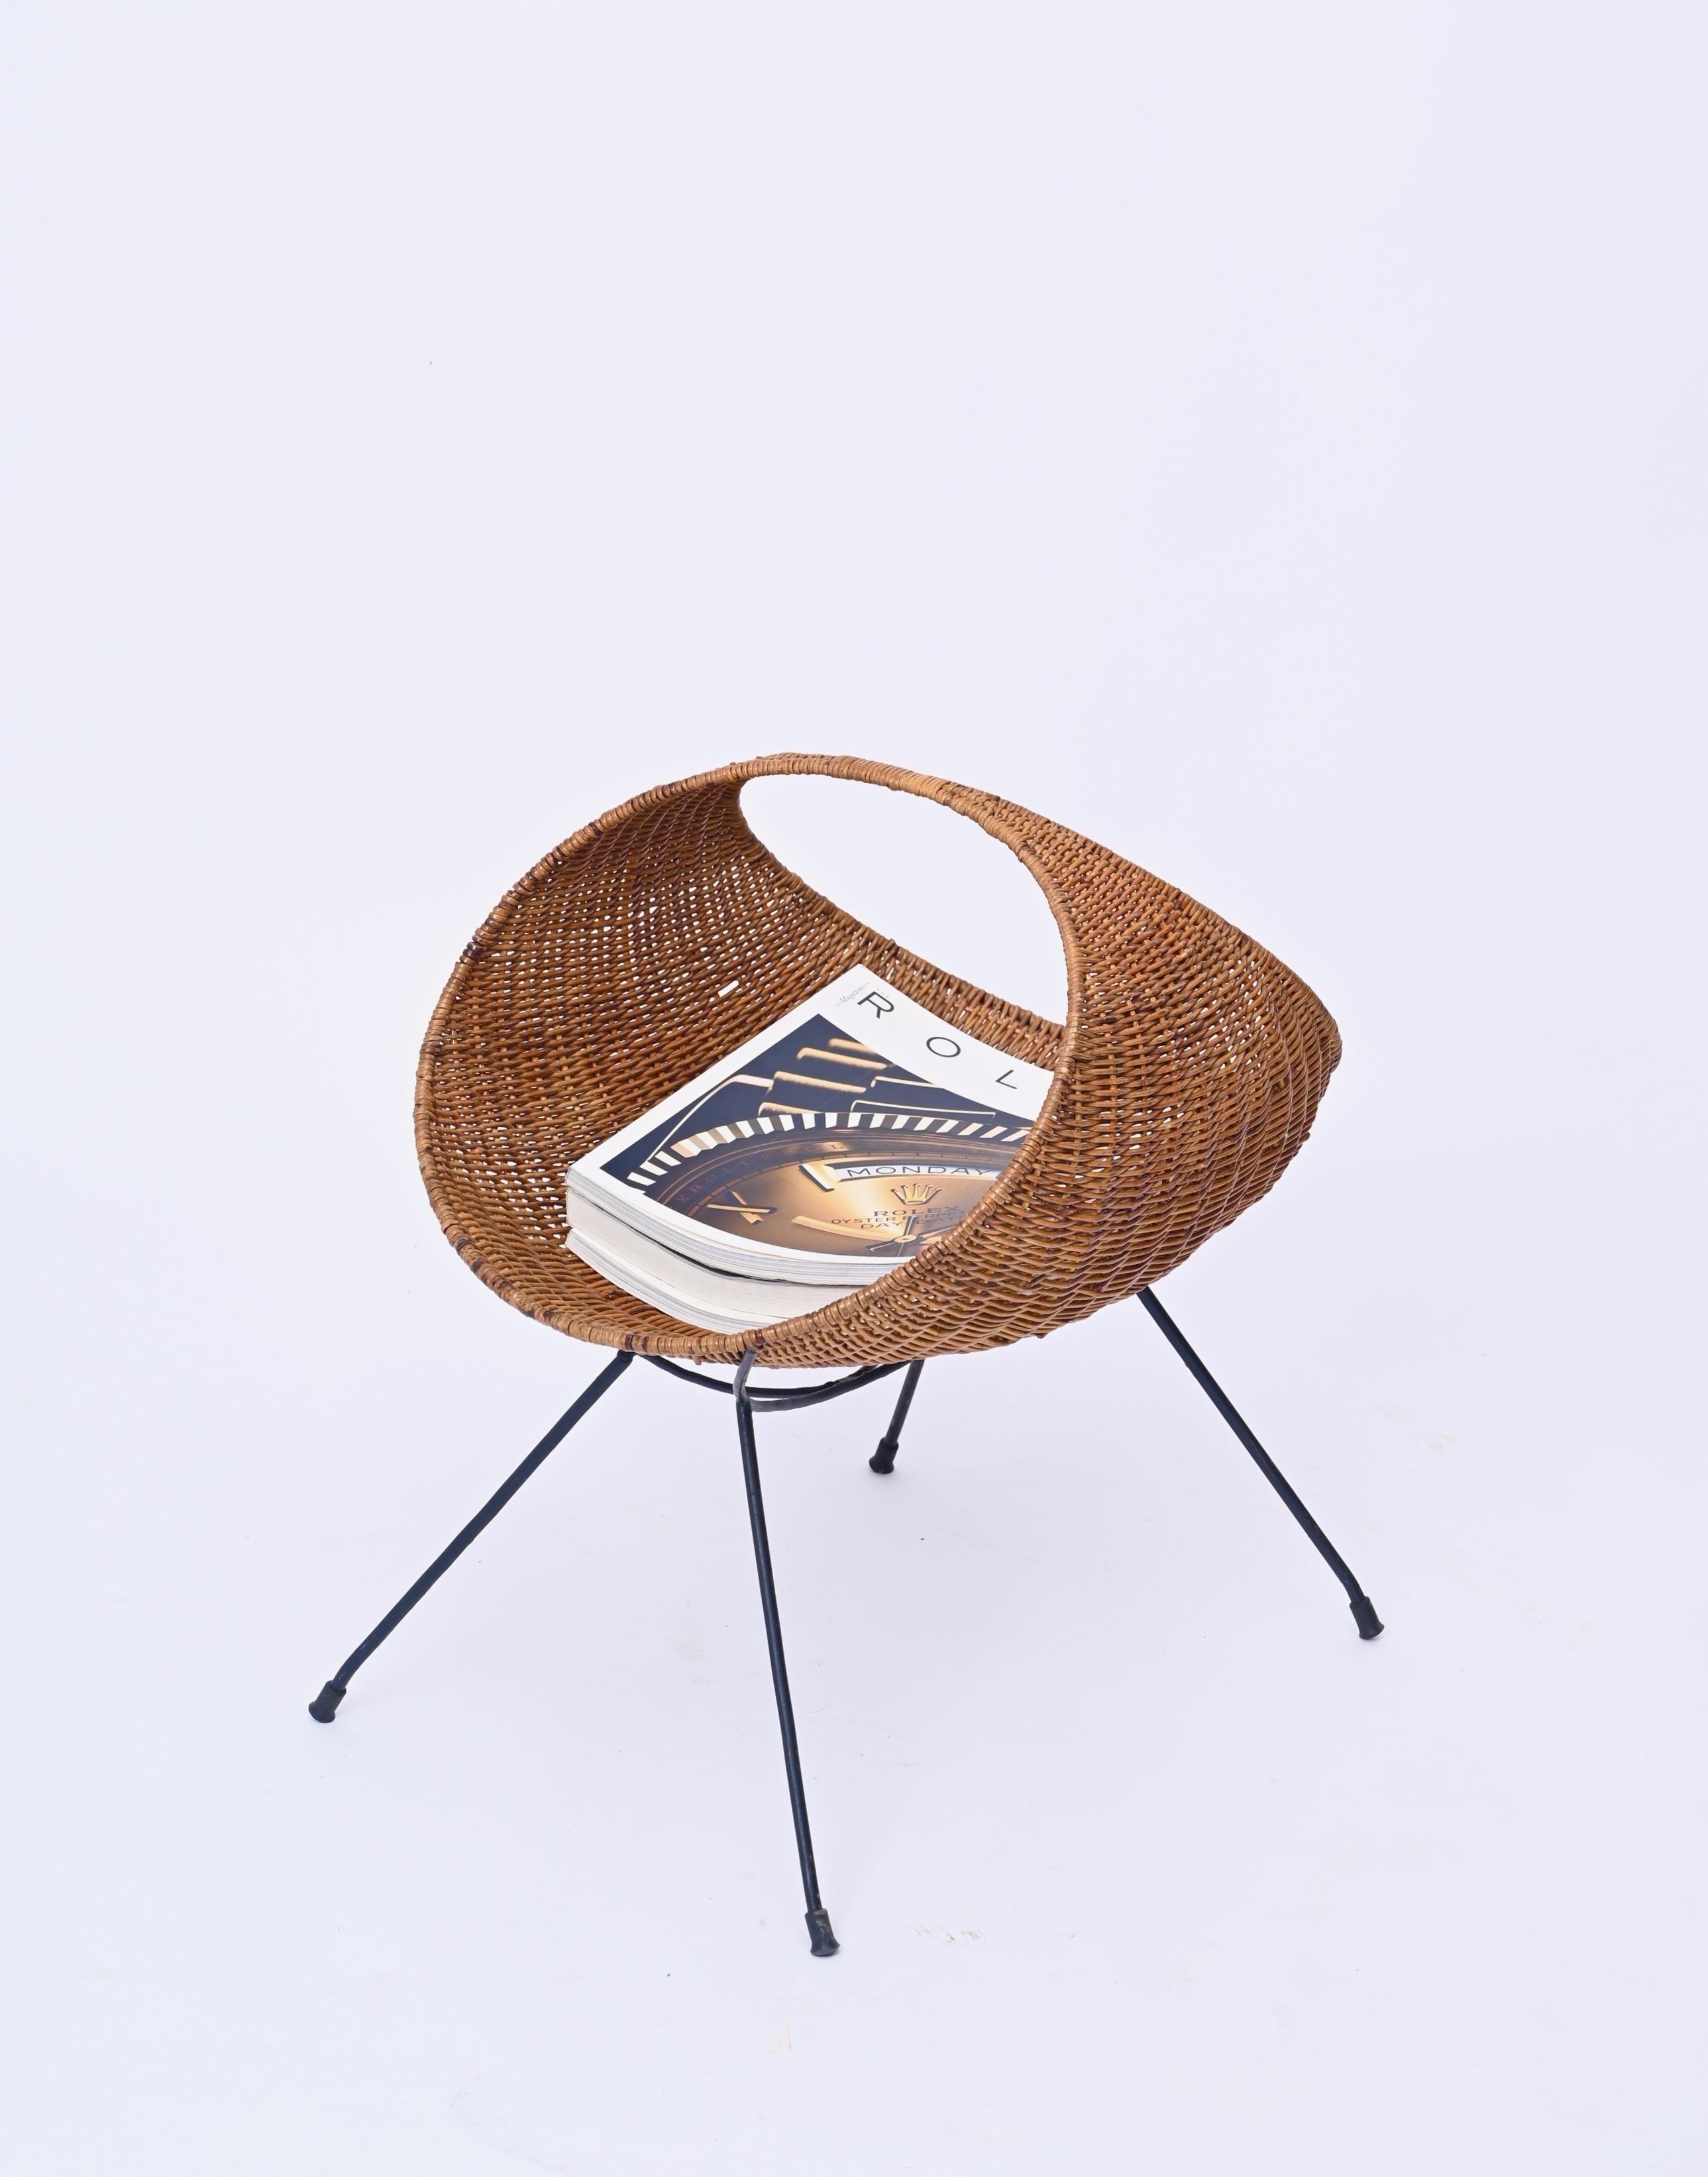 Campo & Graffi Magazine Rack in Wicker and Black Enameled Iron, Italy 1950s For Sale 9